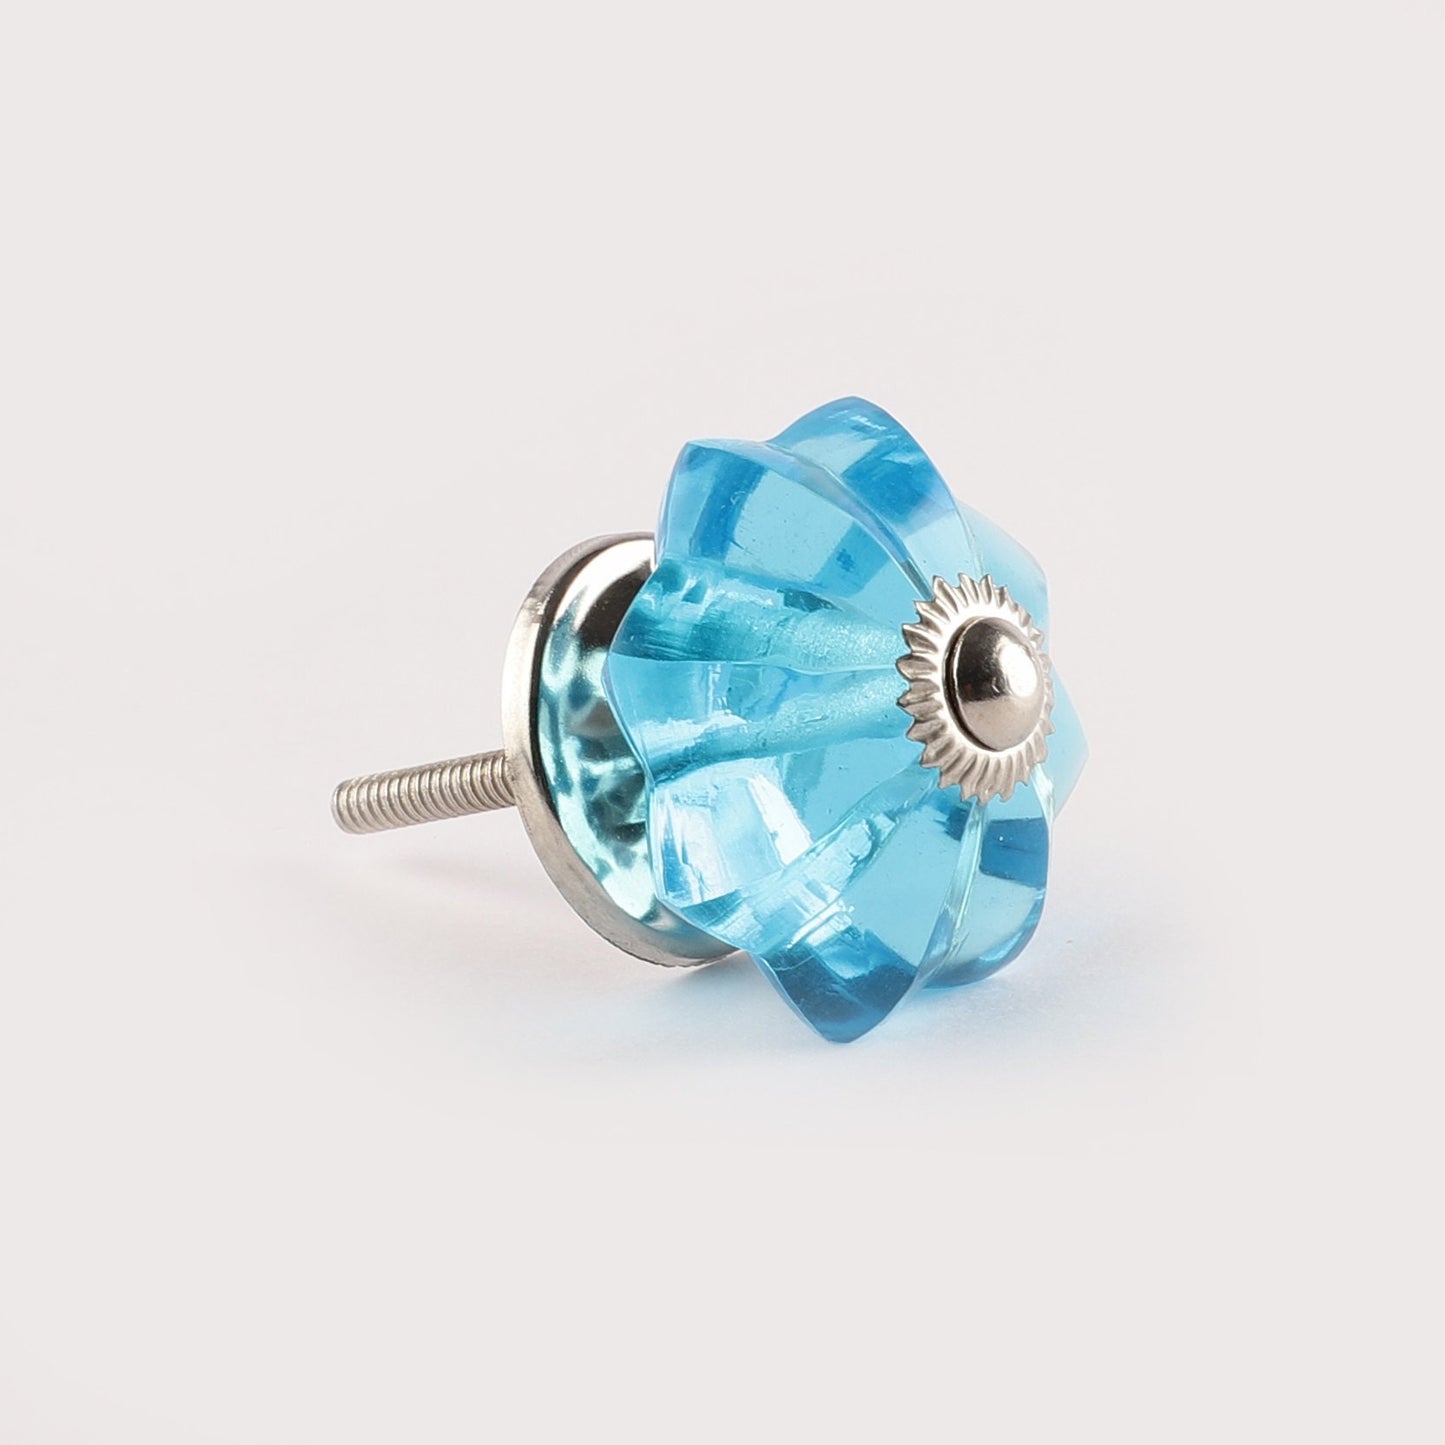 Blue Glass Pull Knobs (G6)